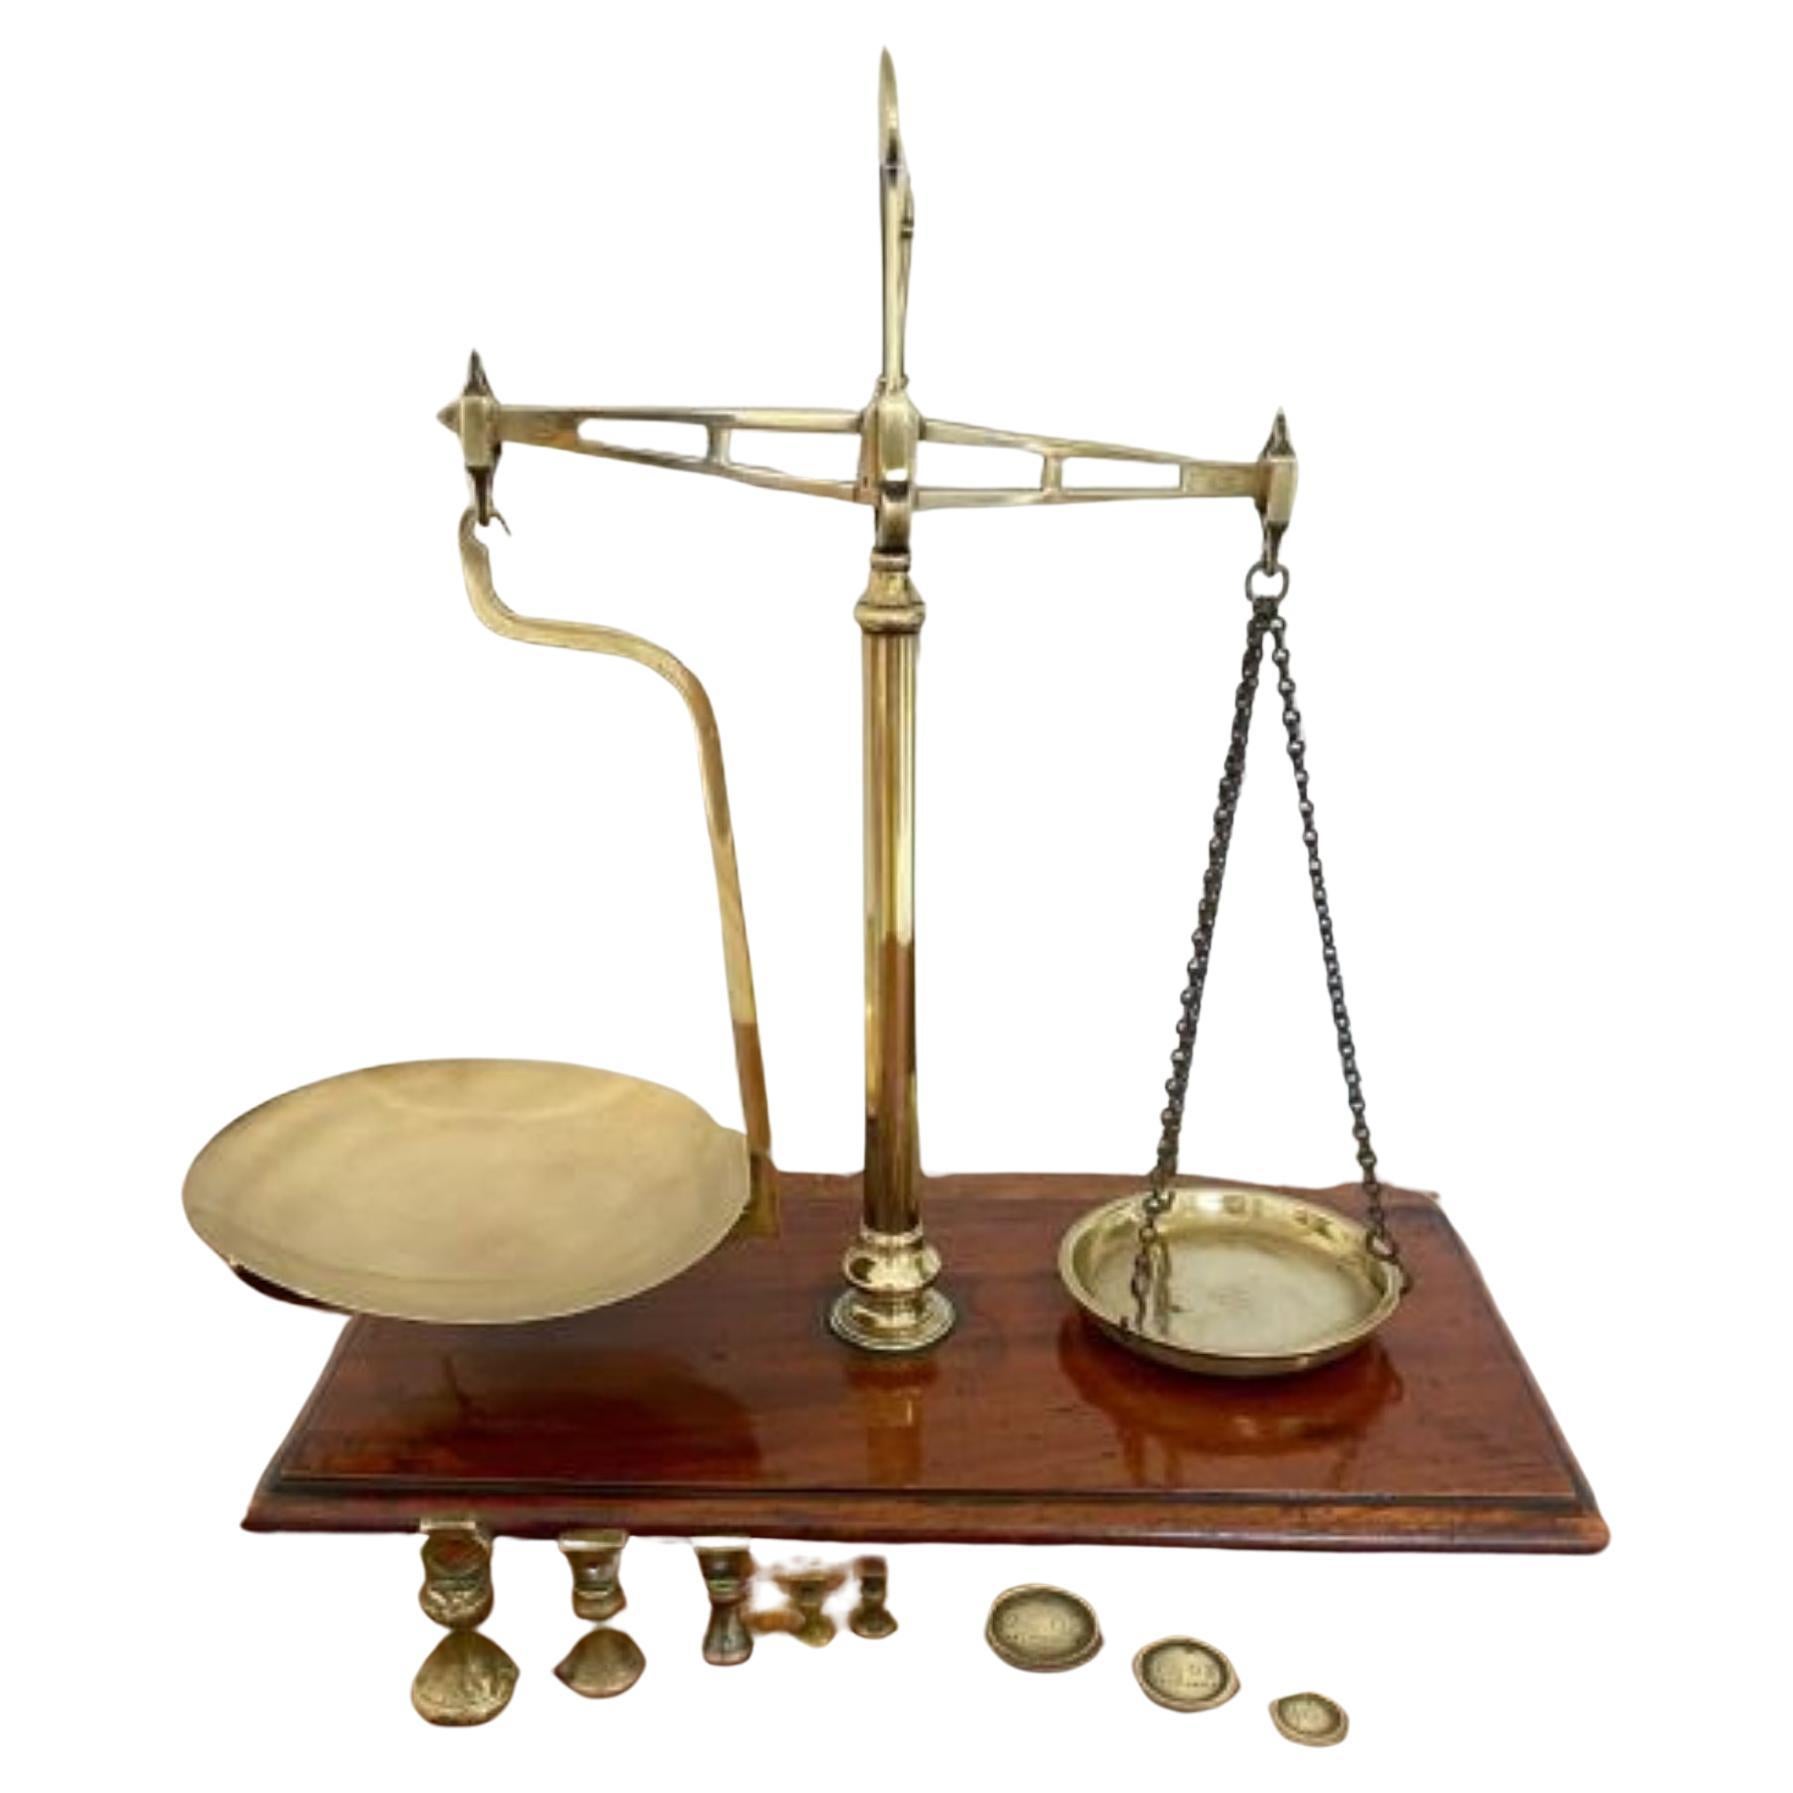 Quality pair of early Victorian 19th century shop scales